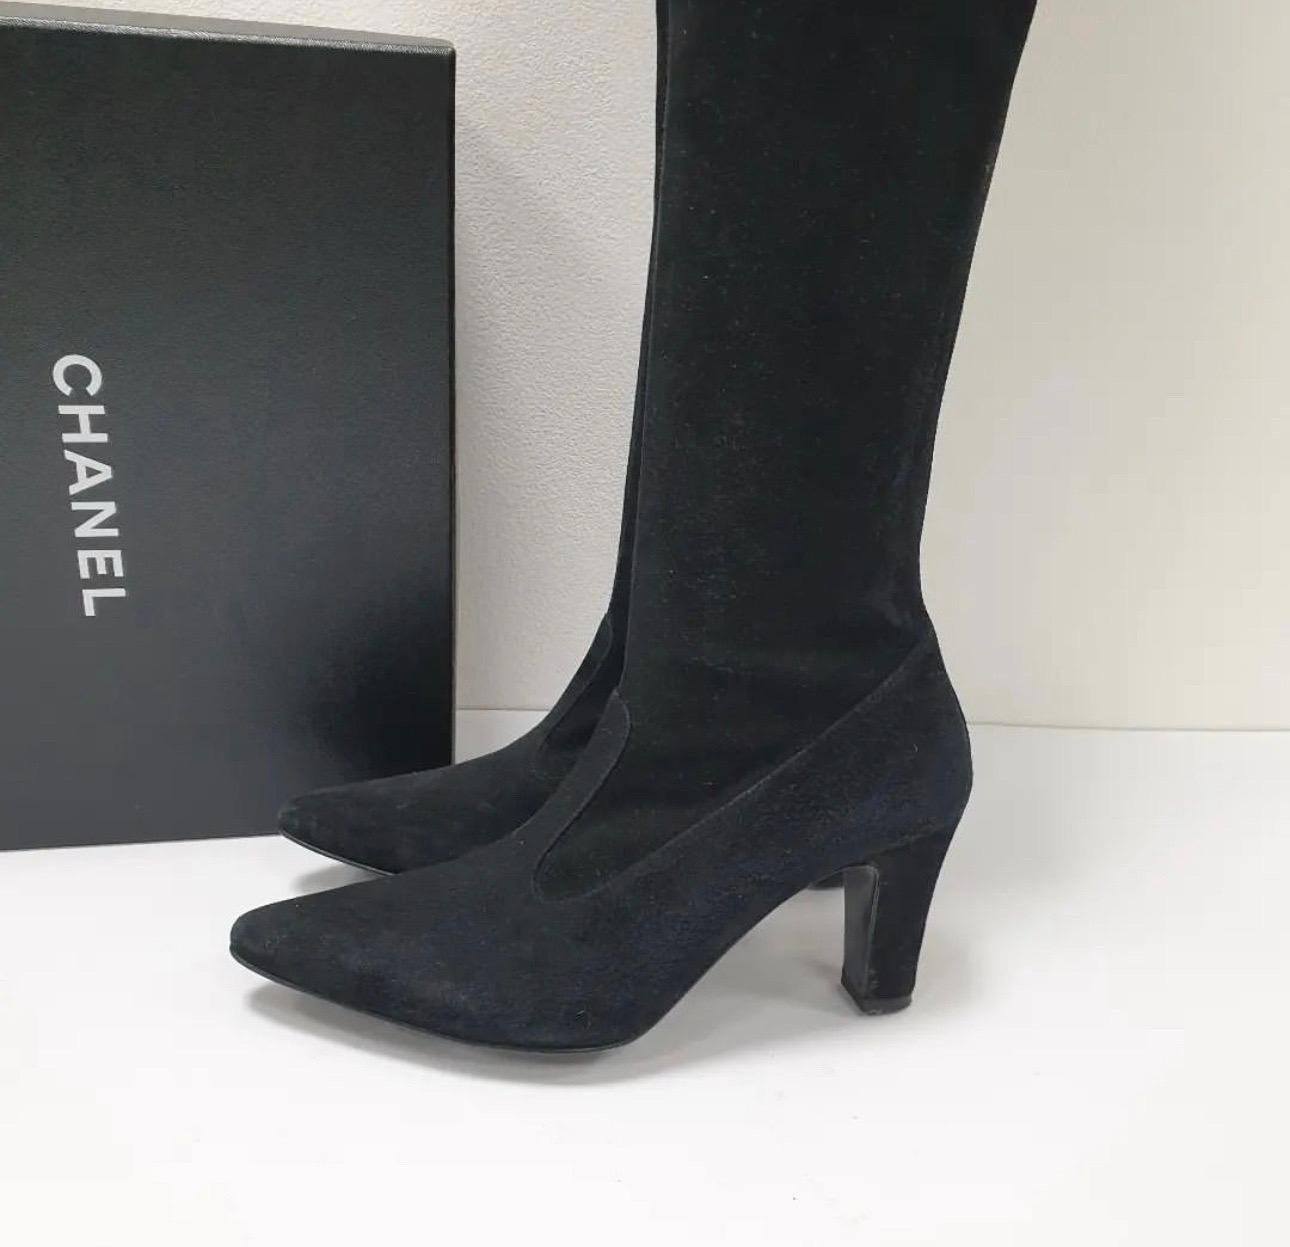  Chanel  Thigh-High Over Knee  boots. 
Black  Lambskin Leather and suede.

Very good condition. Signs of wear seen on pics.
Sz.39
No original packaging.